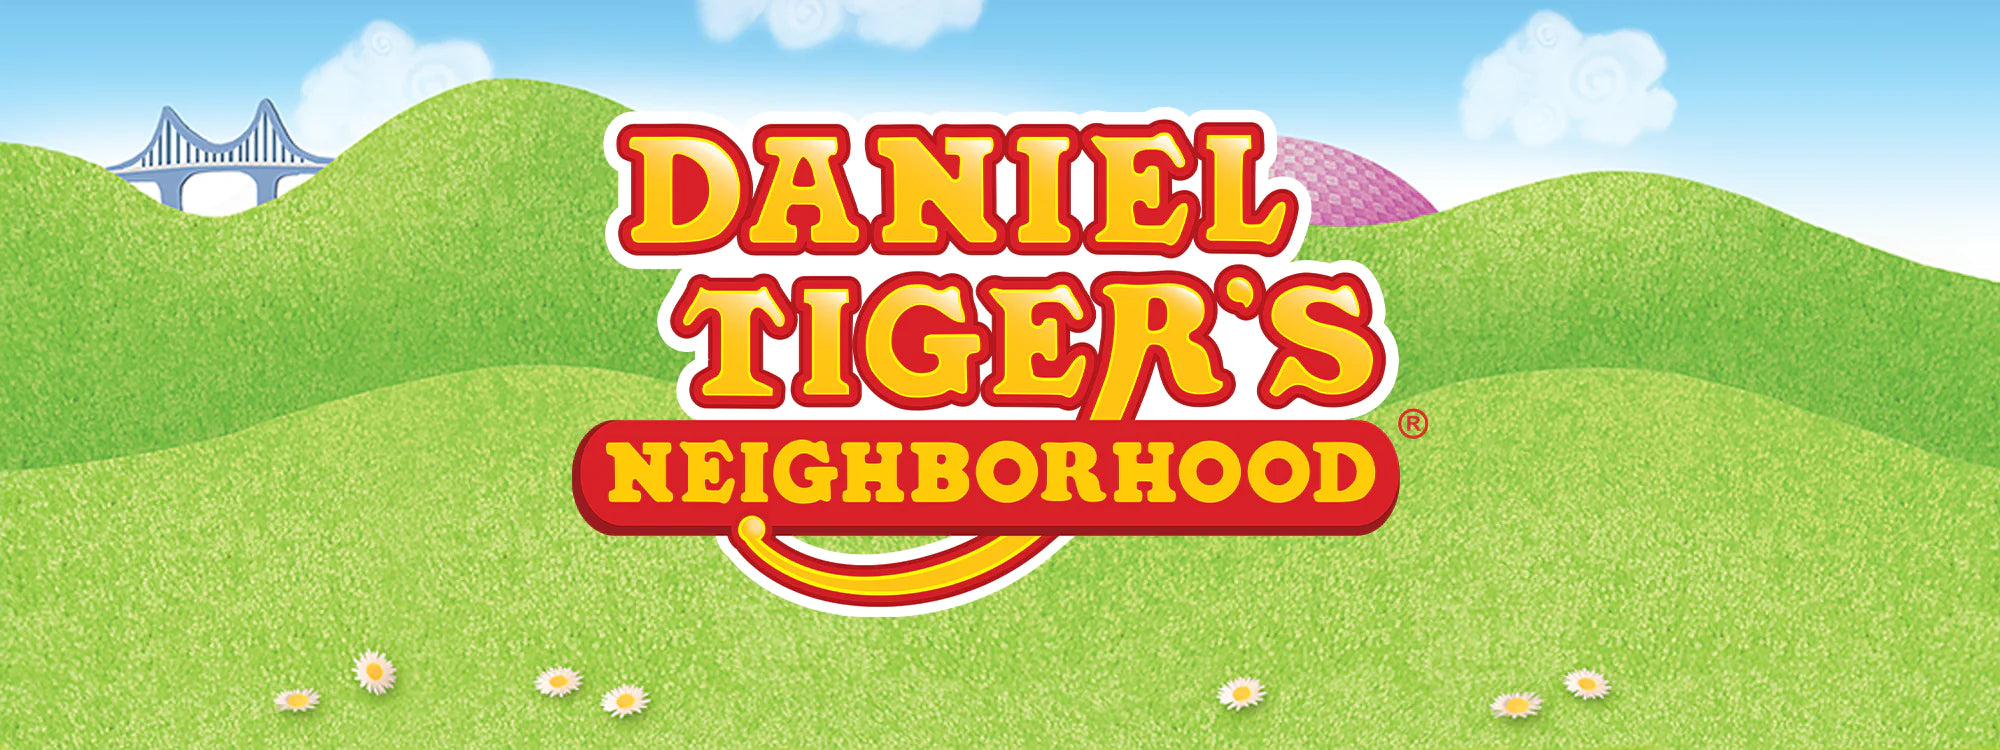 Life’s Little Lessons with Daniel Tiger